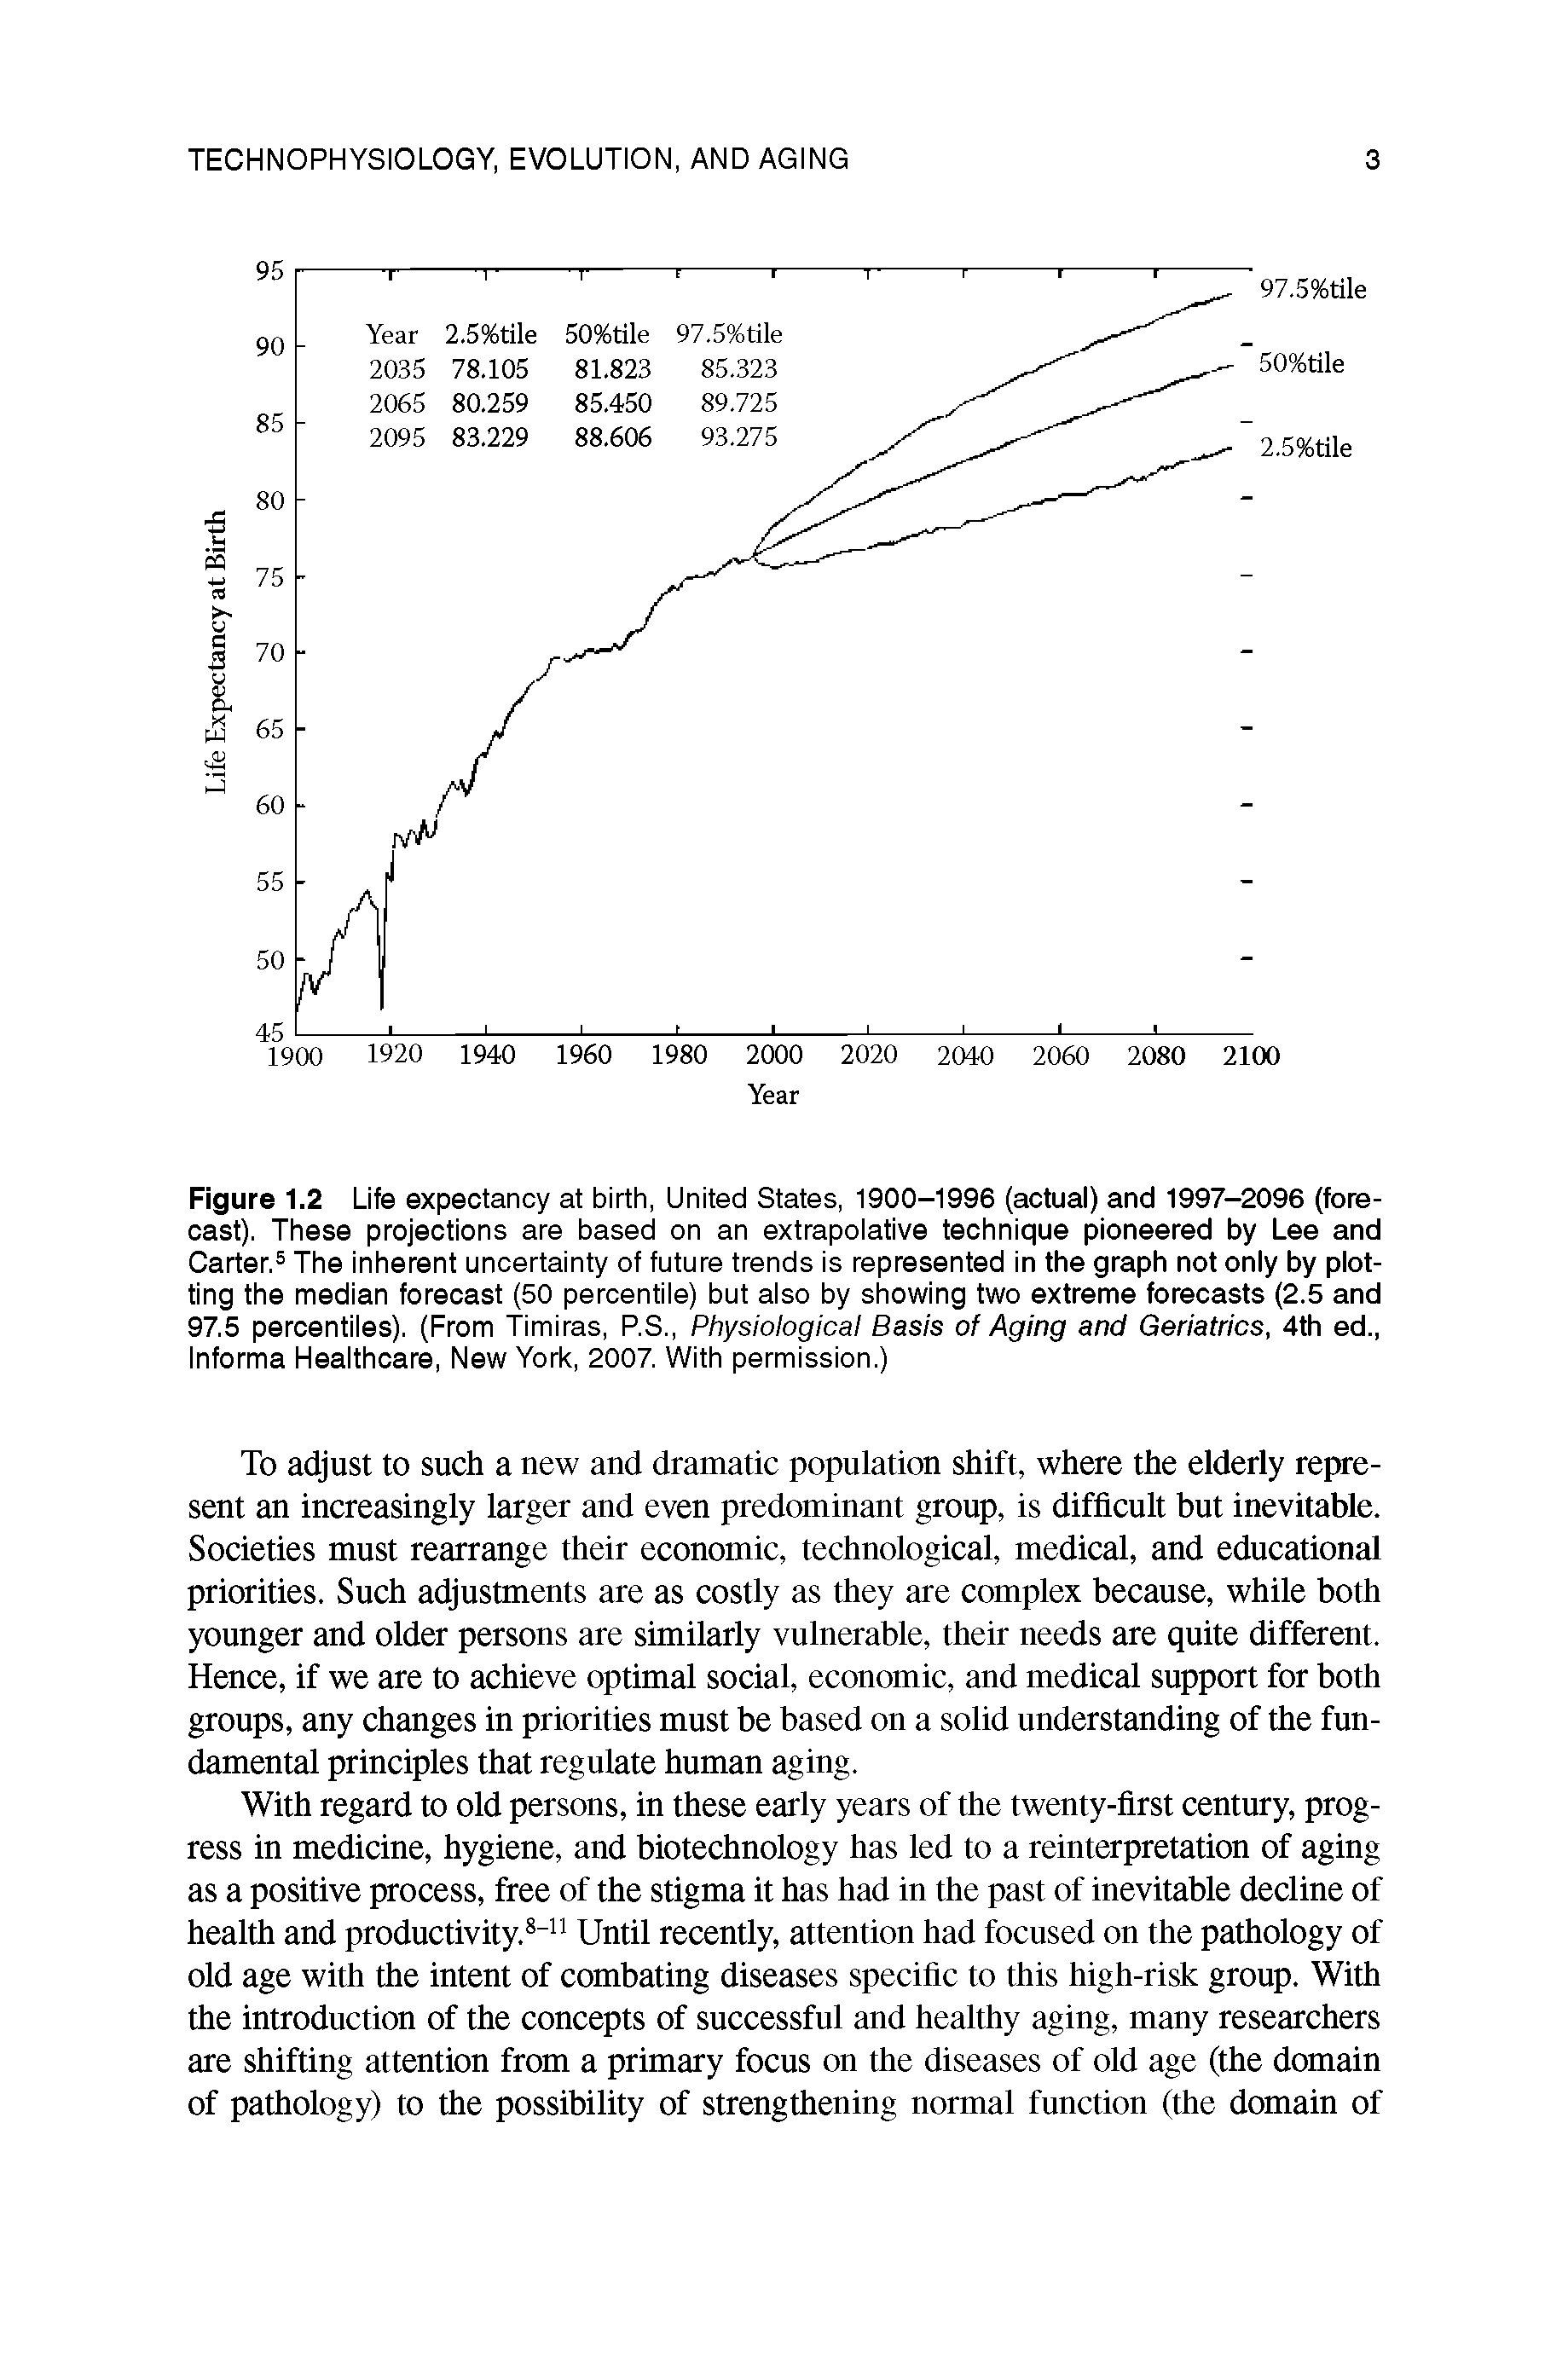 Figure 1.2 Life expectancy at birth, United States, 1900-1996 (actual) and 1997-2096 (forecast). These projections are based on an extrapolative technique pioneered by Lee and Carter.5 The inherent uncertainty of future trends is represented in the graph not only by plotting the median forecast (50 percentile) but also by showing two extreme forecasts (2.5 and 97.5 percentiles). (From Timiras, P.S., Physiological Basis of Aging and Geriatrics, 4th ed., Informa Healthcare, New York, 2007. With permission.)...